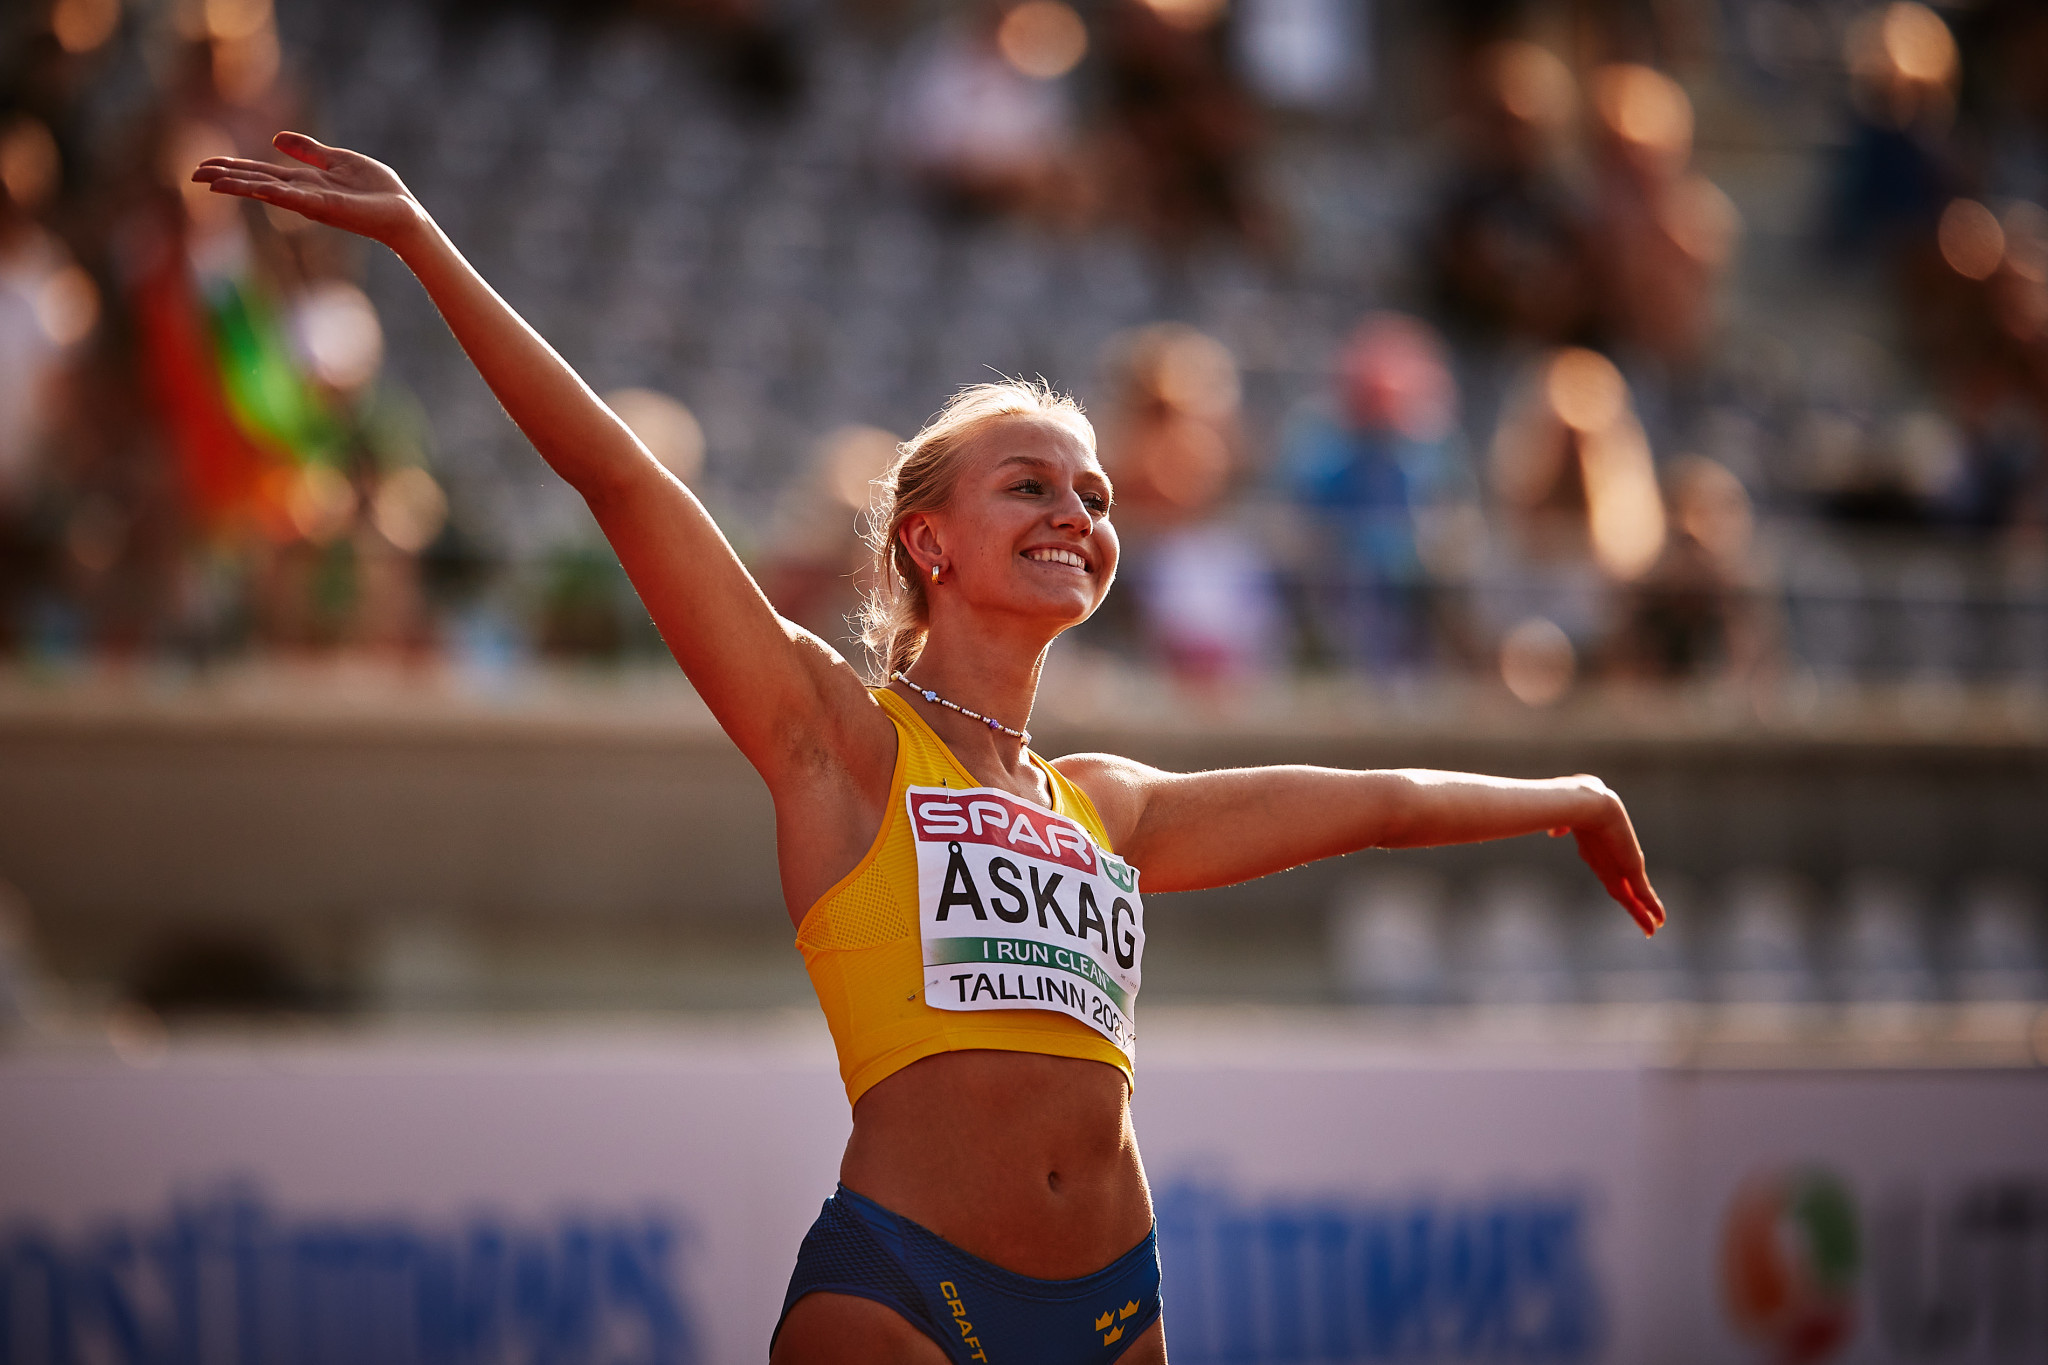 Maja Åskag is one of the top prospects for funding in Sweden ©Getty Images